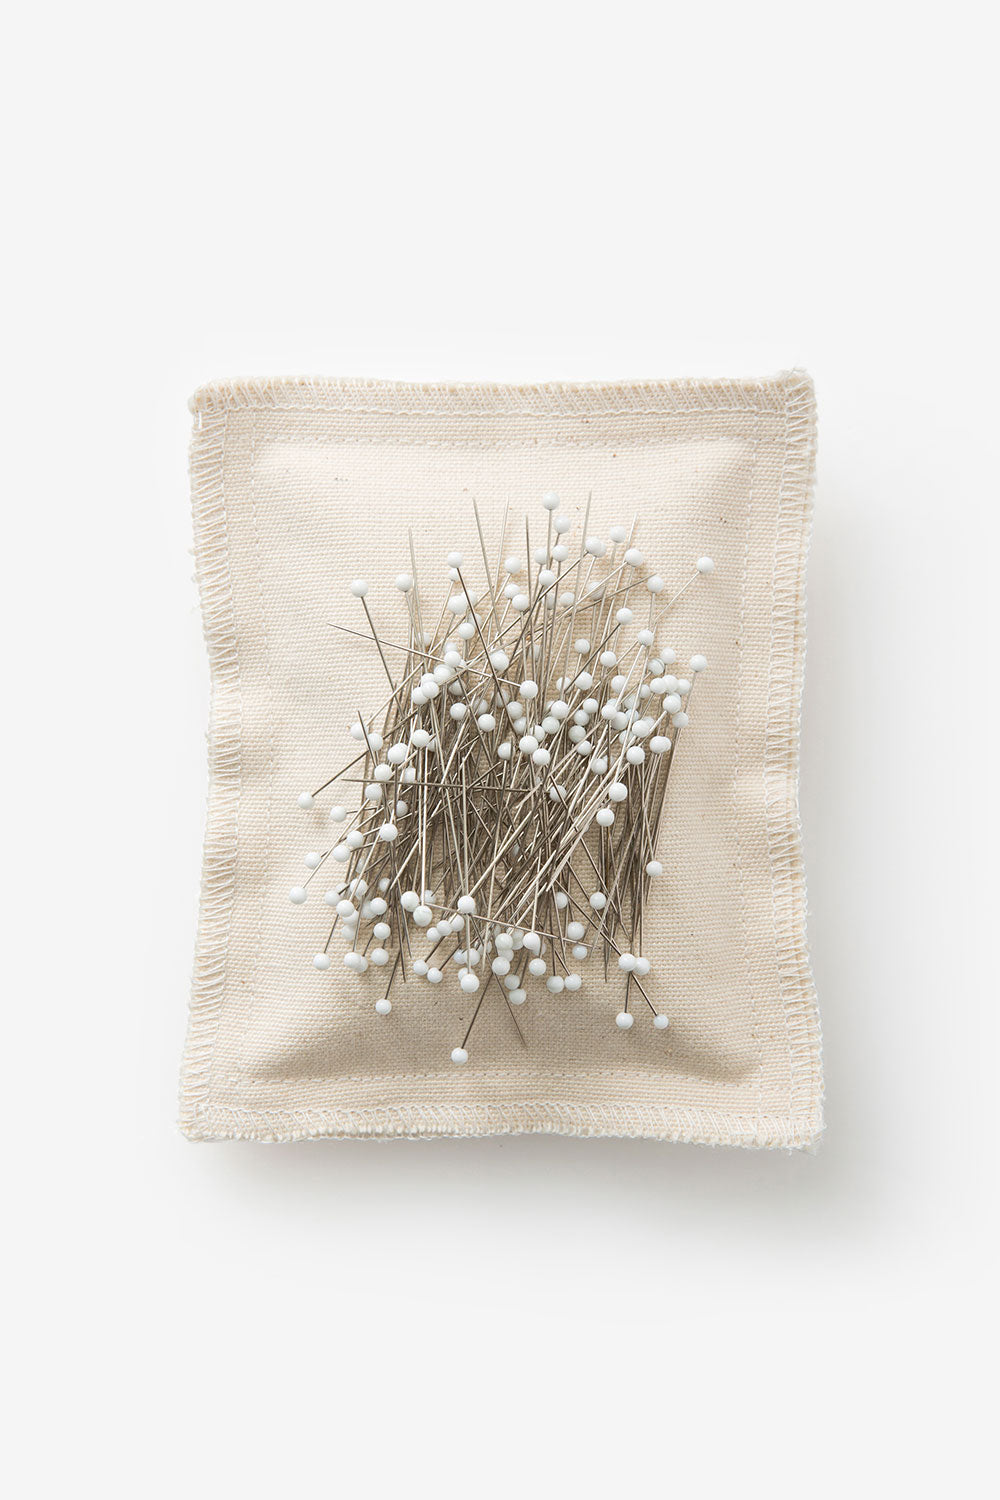 Pin Cushions - Come & Go Workshop